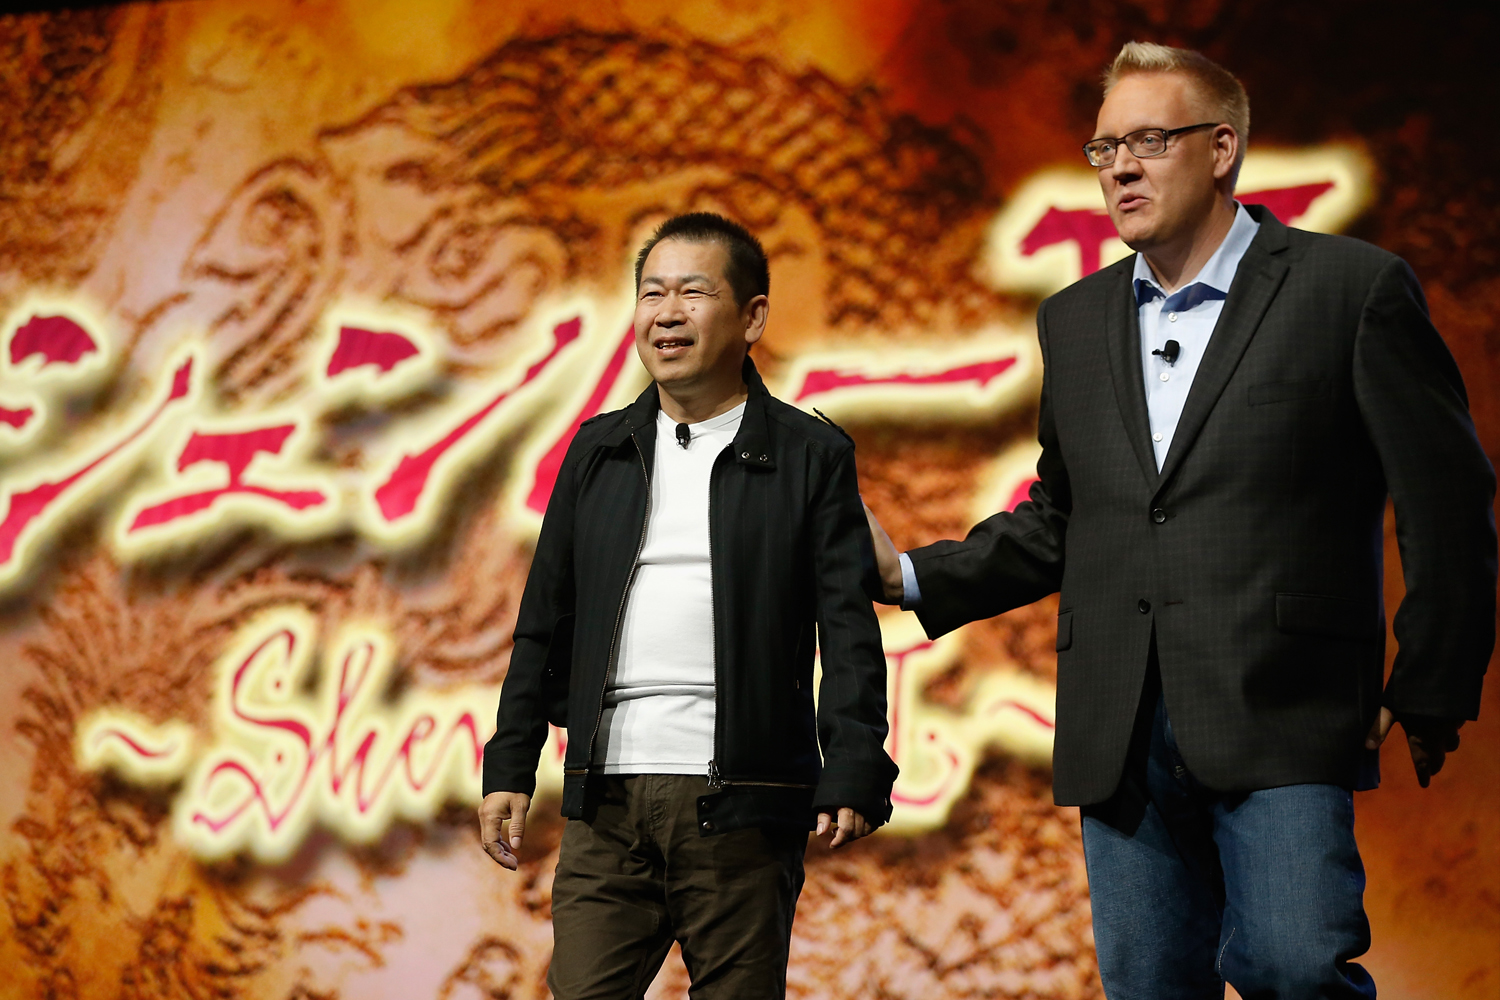 Game designer Yu Suzuki and Sony Computer Entertainment America vice president of publisher and developer relations, Adam Boyes discus "Shenmue 3" during the Sony E3 press conference at the  L.A. Memorial Sports Arena on June 15, 2015 in Los Angeles, California. (Christian Petersen — Getty Images)